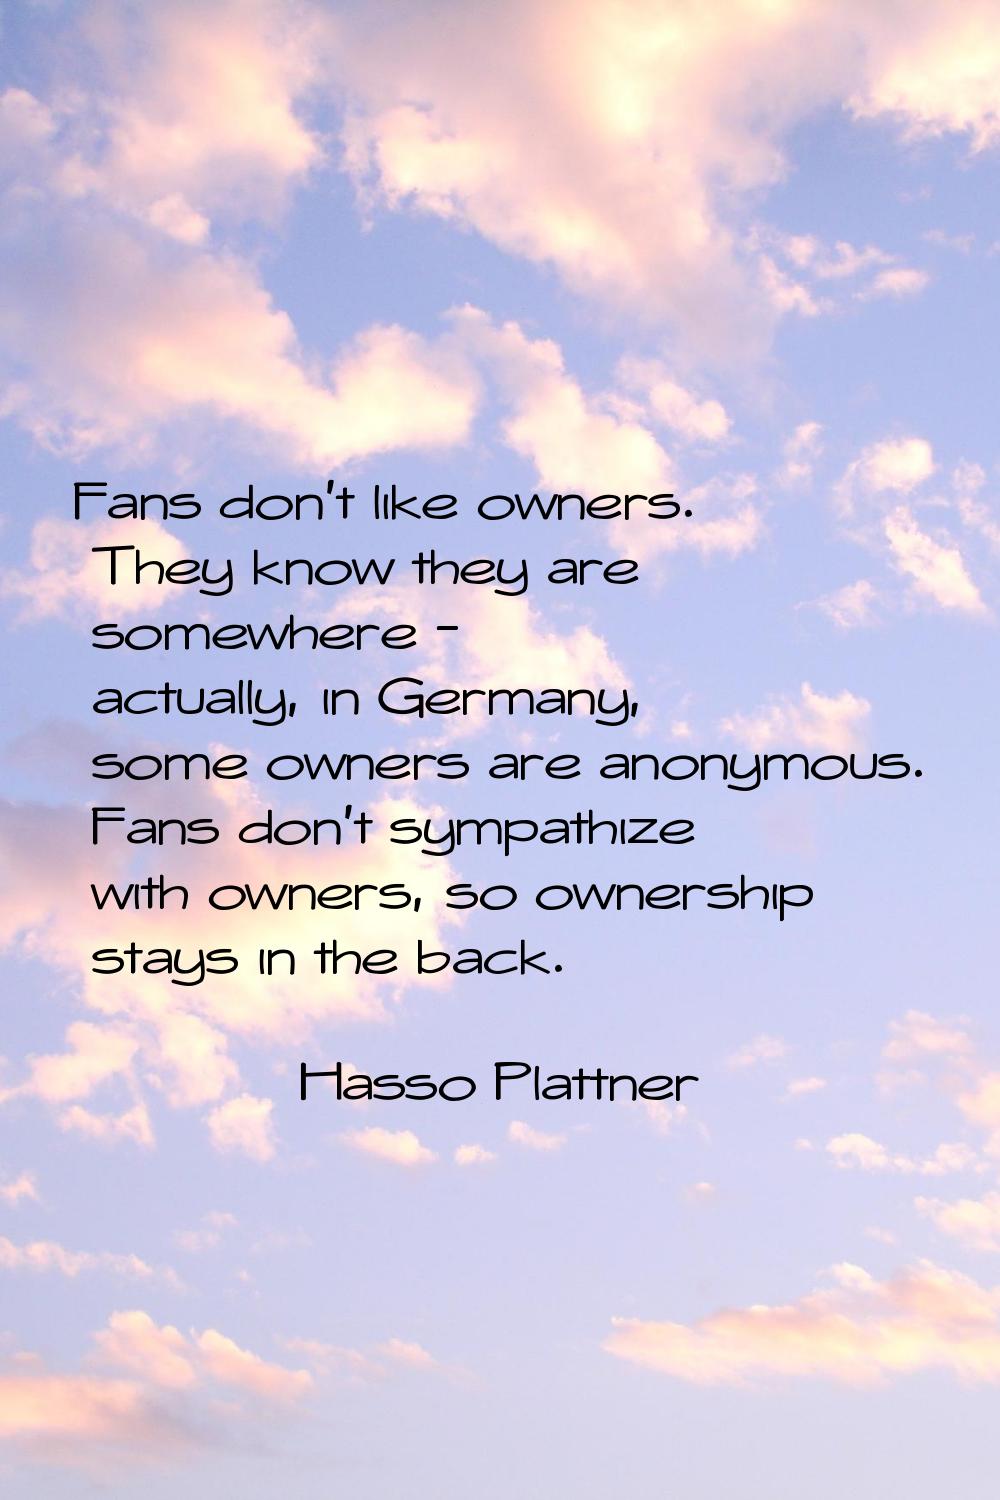 Fans don't like owners. They know they are somewhere - actually, in Germany, some owners are anonym